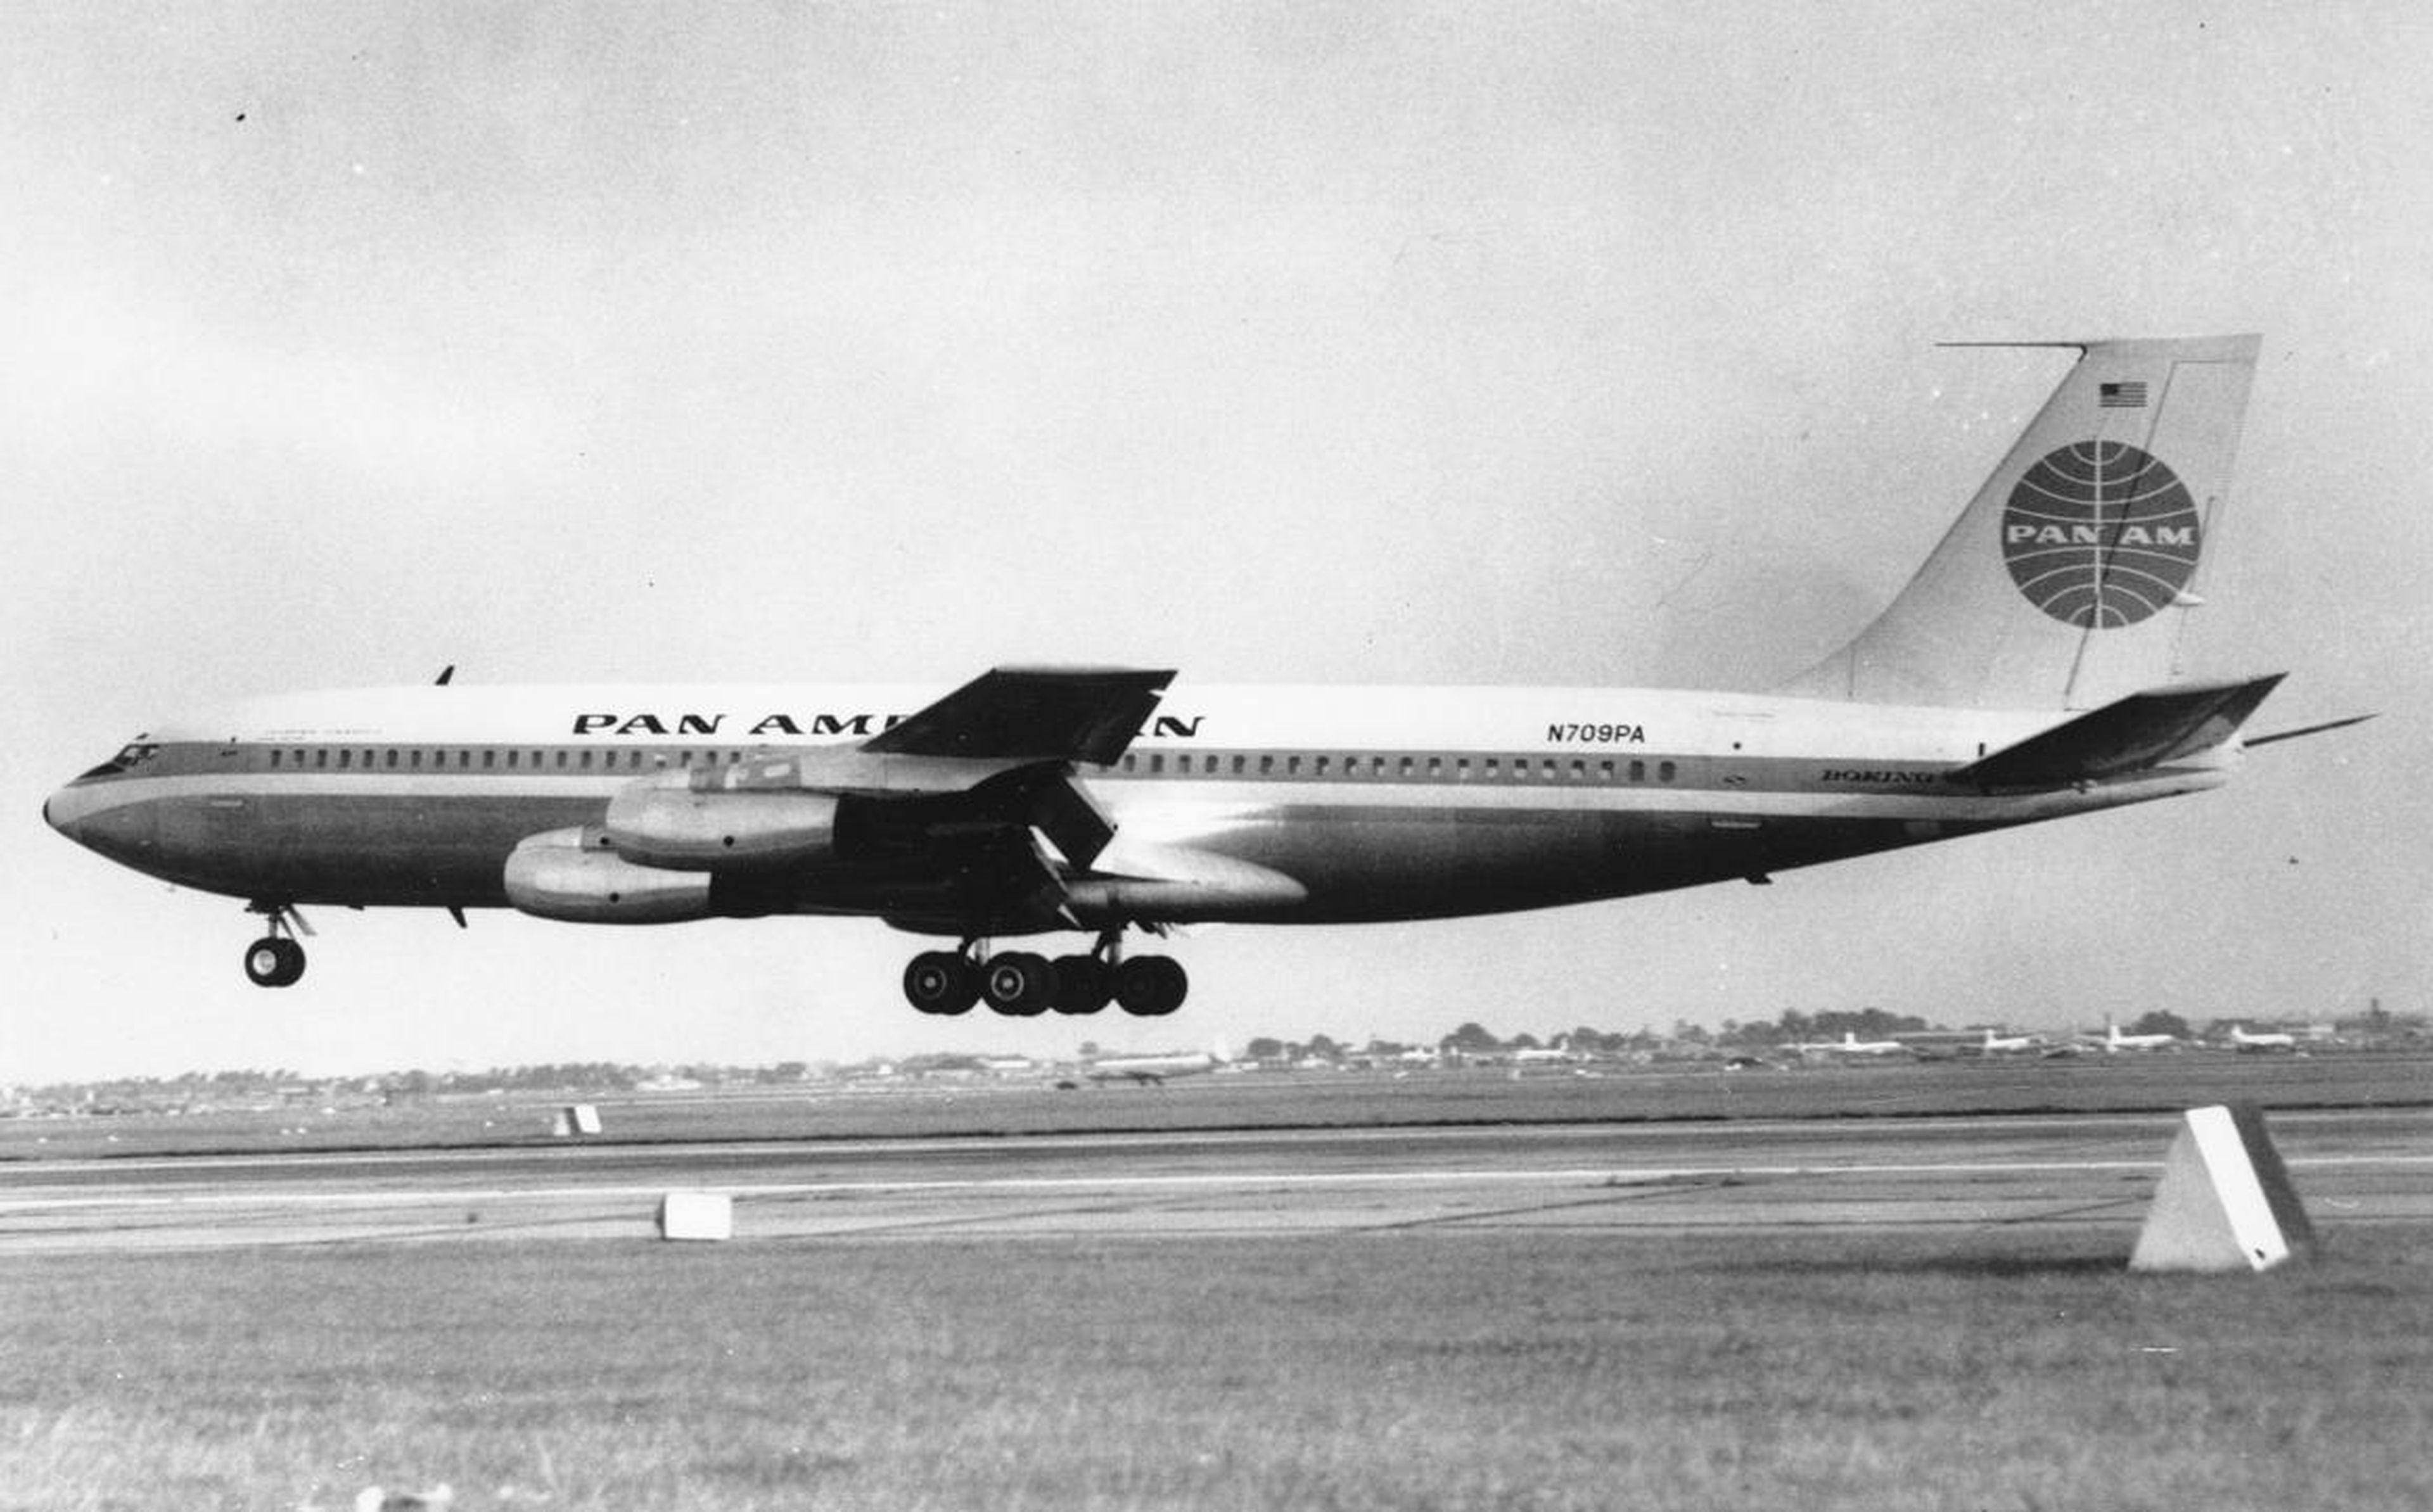 While the Comet was dealing with its troubles, it was overtaken by the Boeing 707 and...